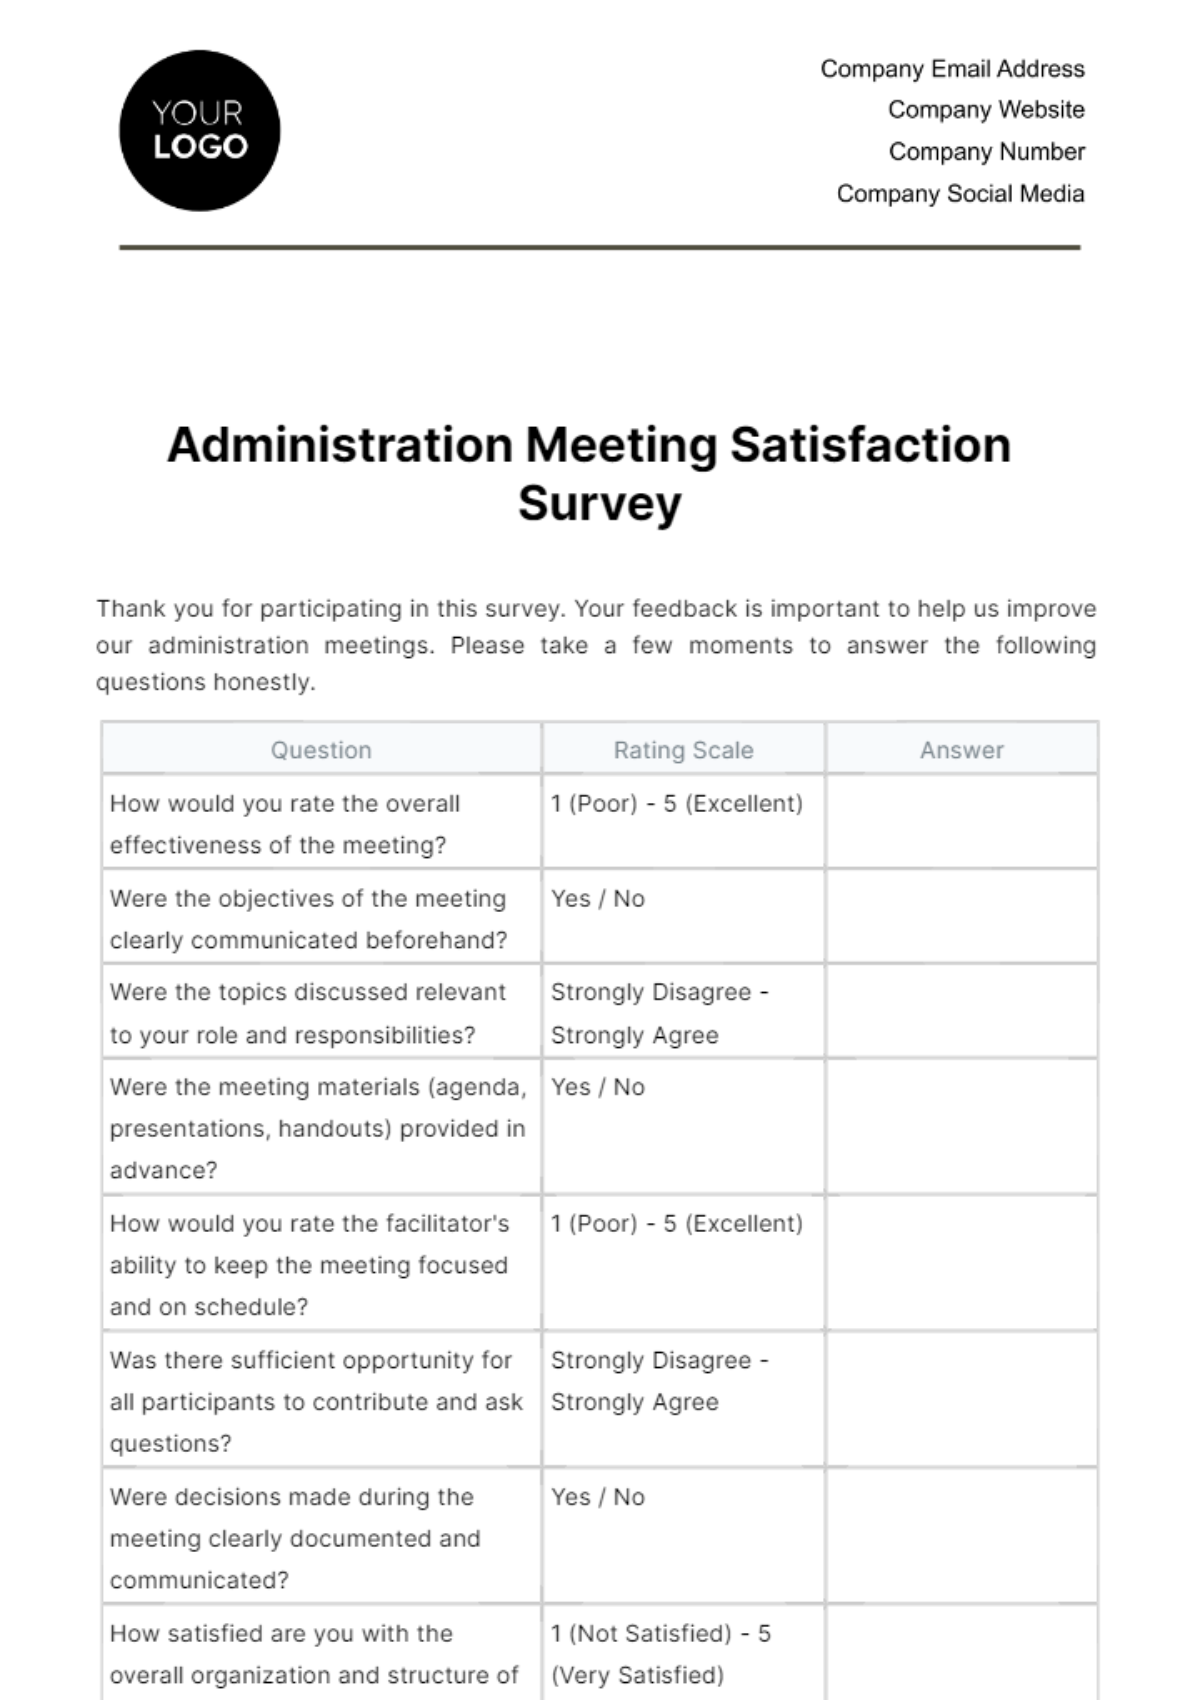 Administration Meeting Satisfaction Survey Template